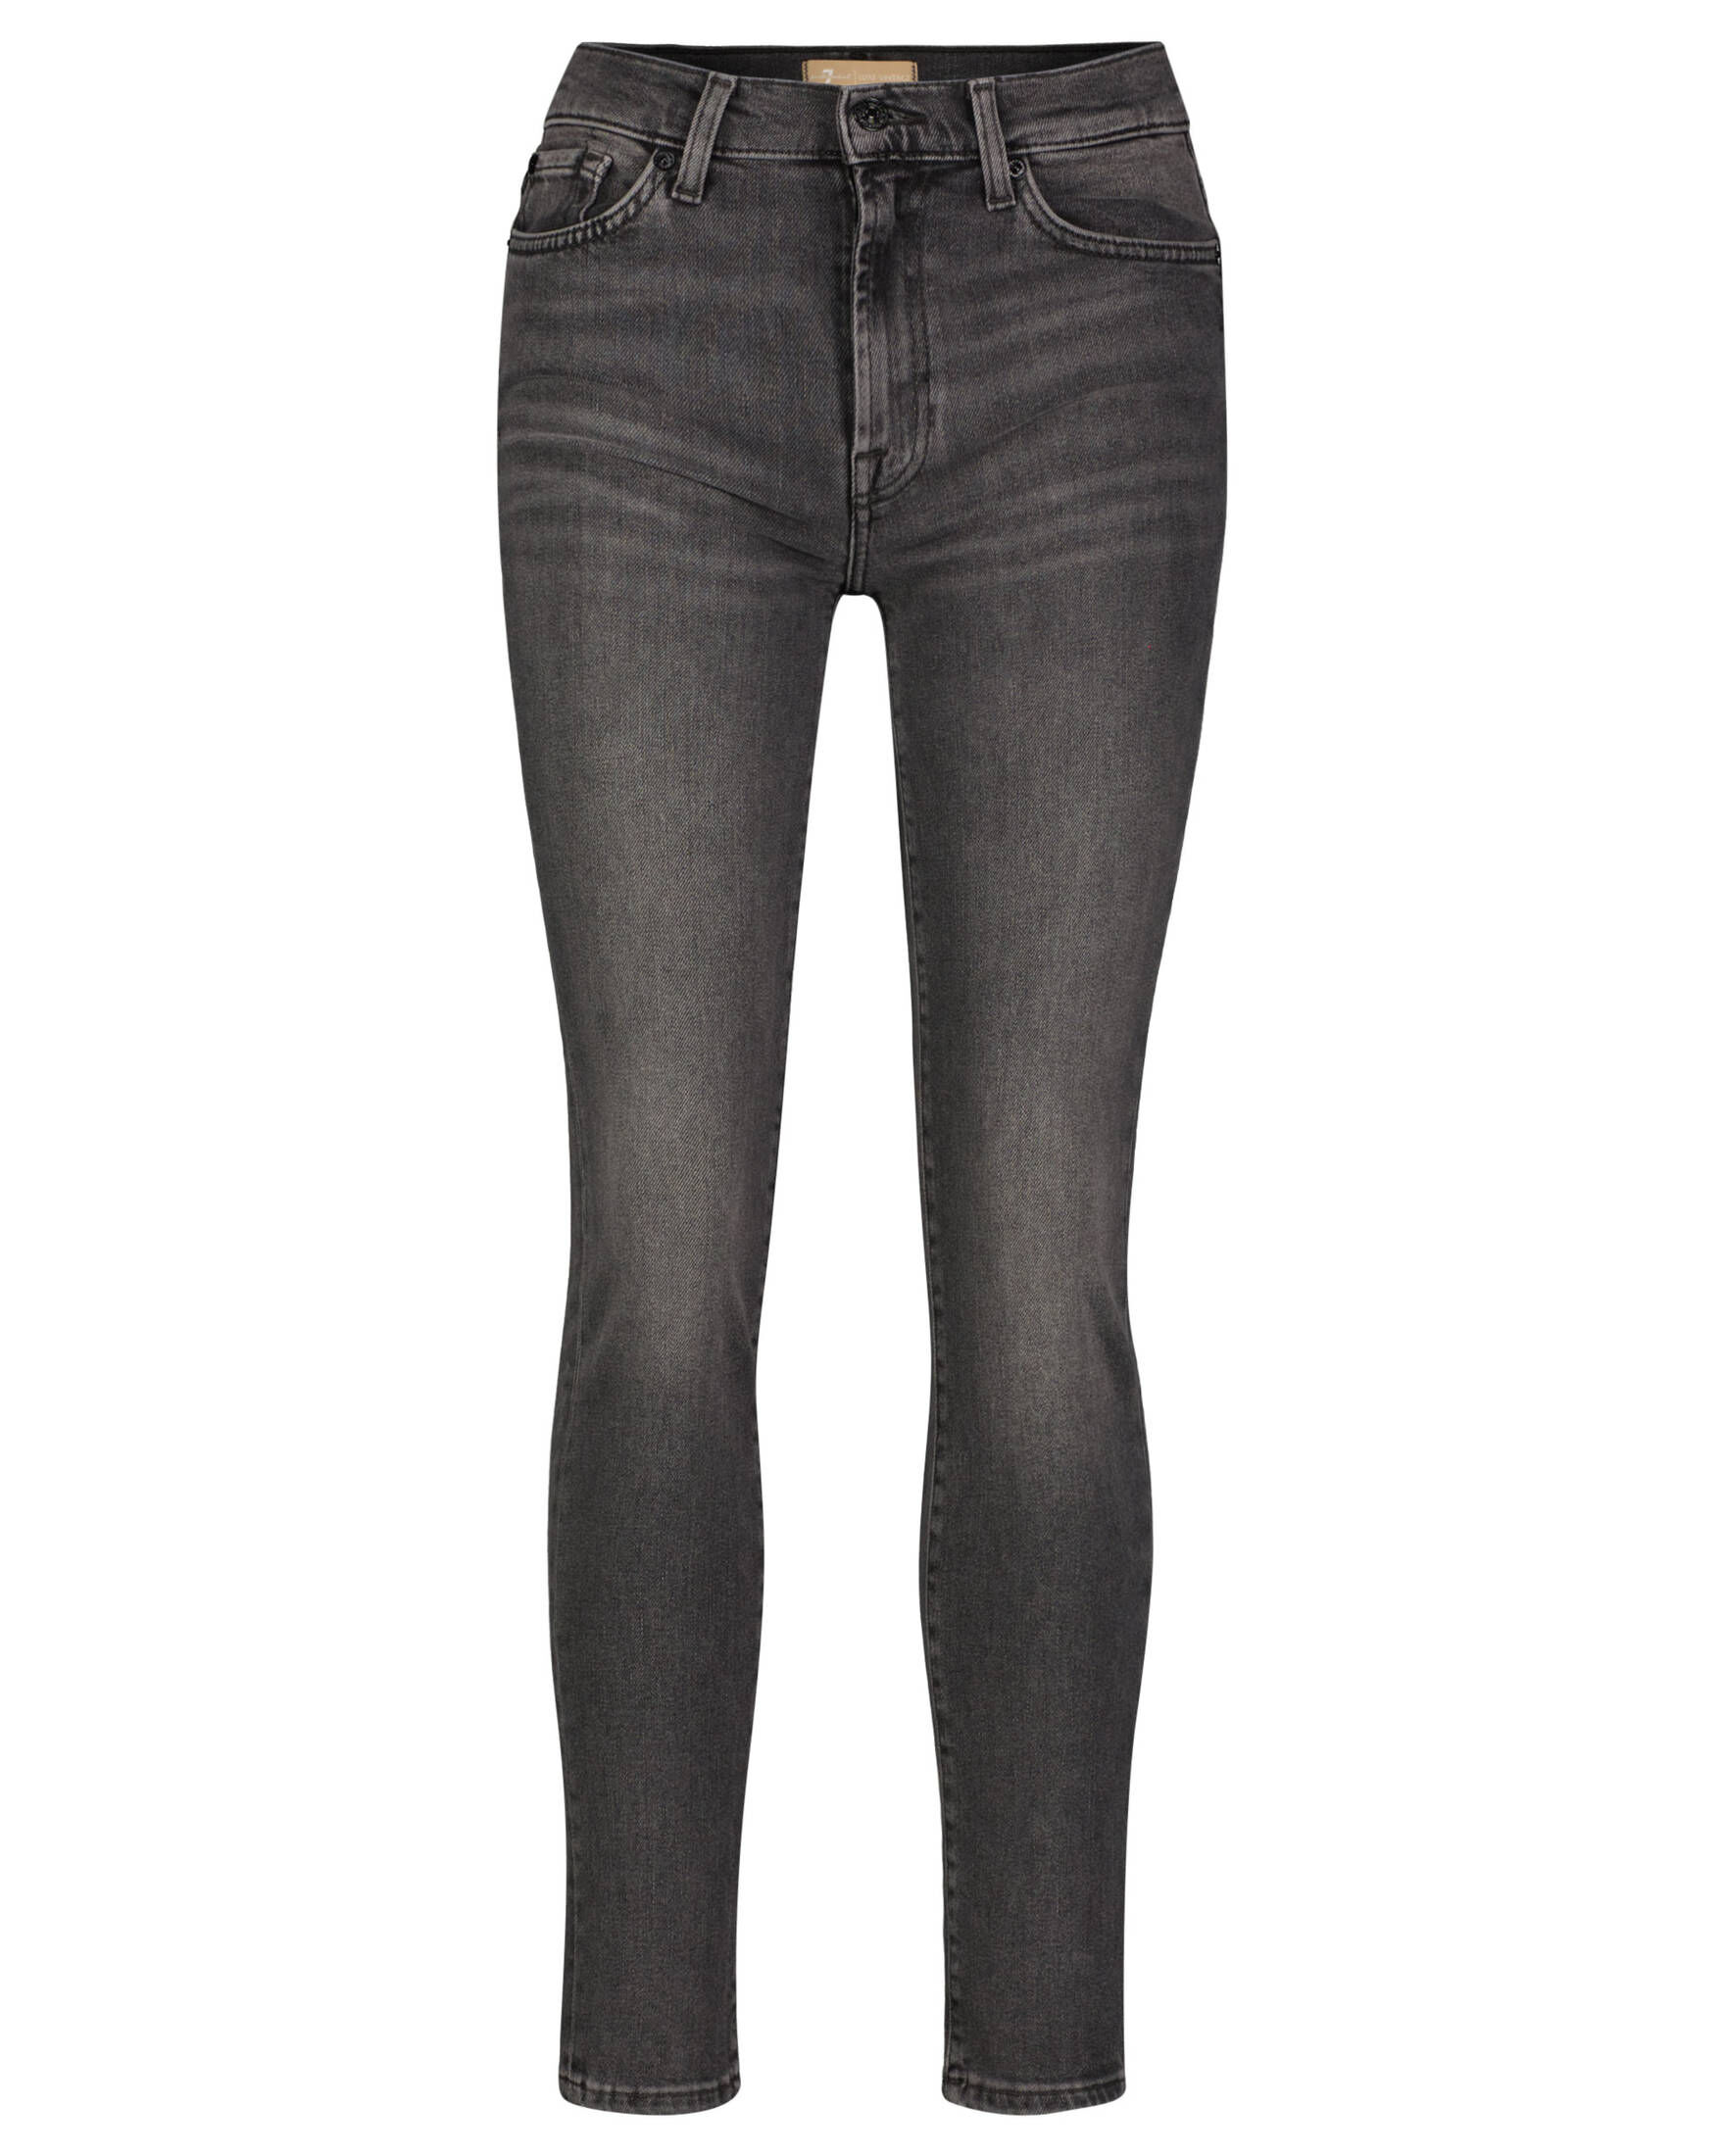 7 for all mankind| Damen Jeans ROXANNE LUXE VINTAGE COURAGE Slim Fit